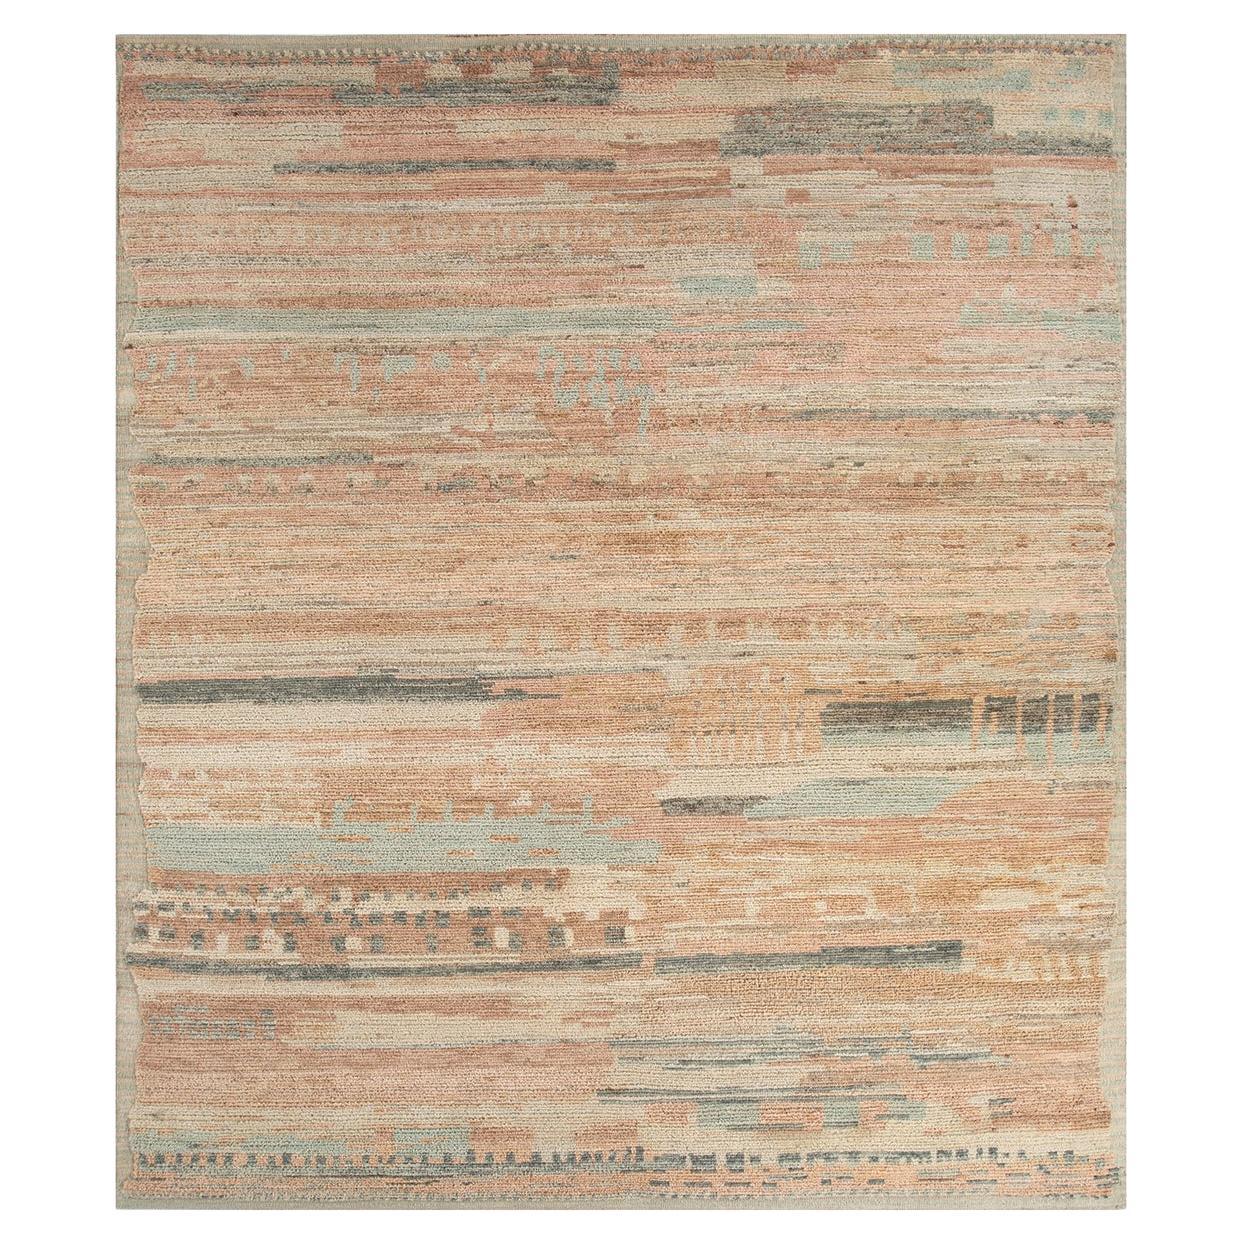 Stacked Rug by Rural Weavers, Knotted, Wool, 240x300cm For Sale